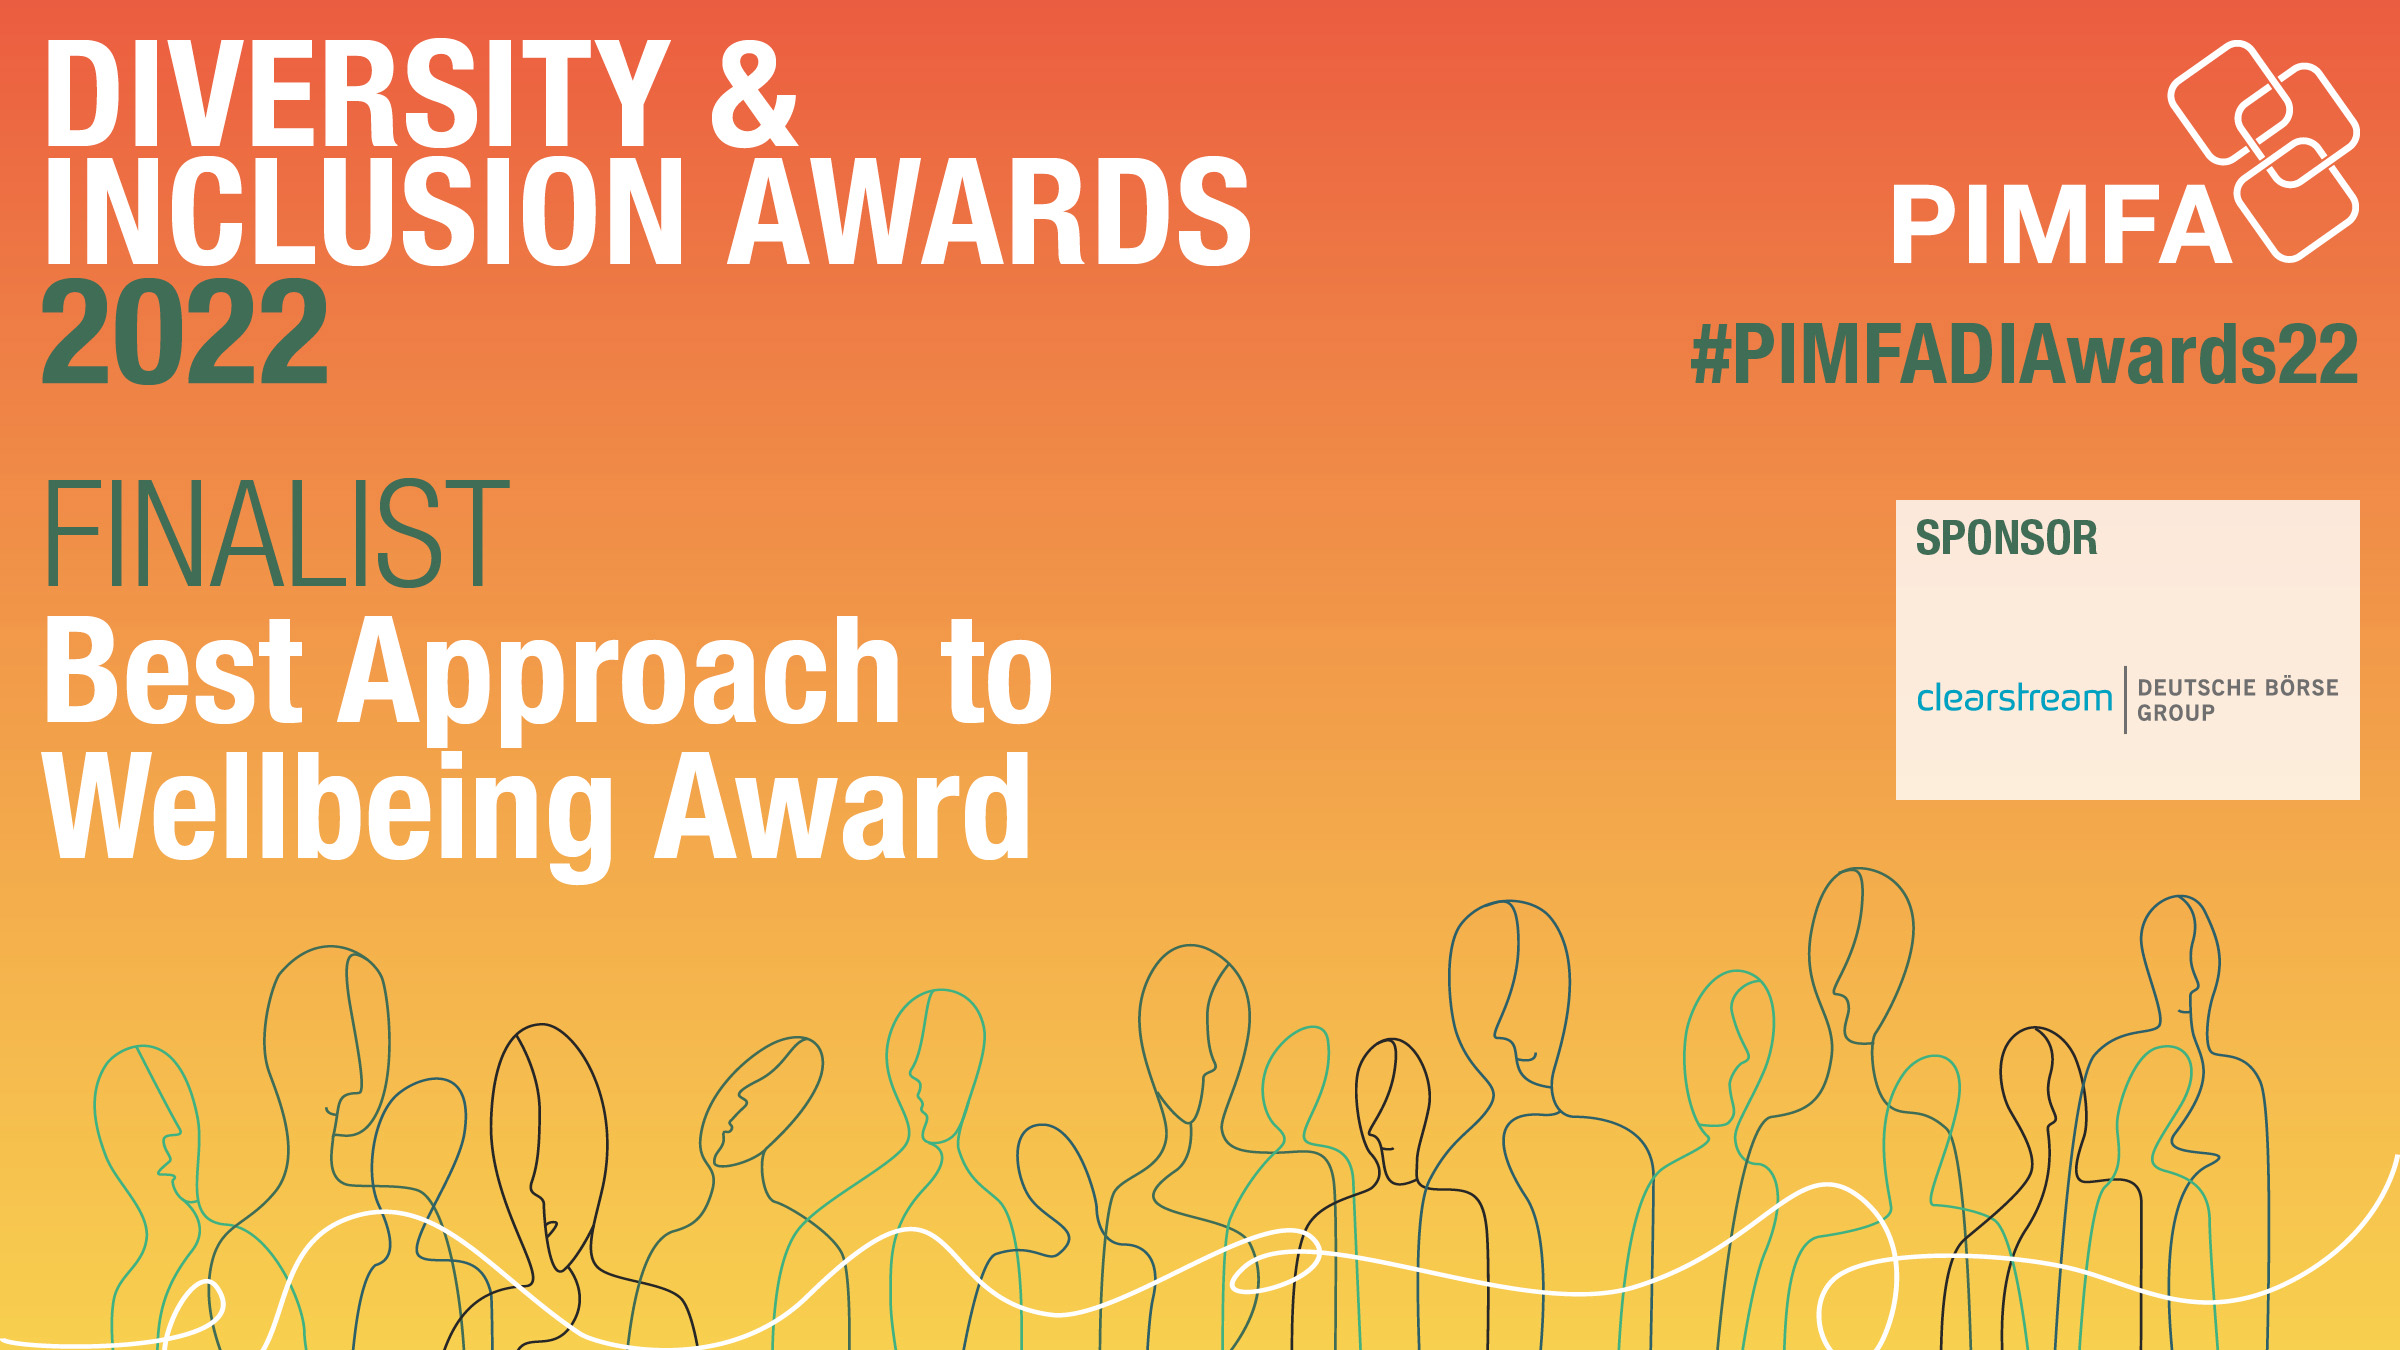 PIMFA Diversity & Inclusion Awards - Best Approach to Wellbeing Award Shortlist 2022